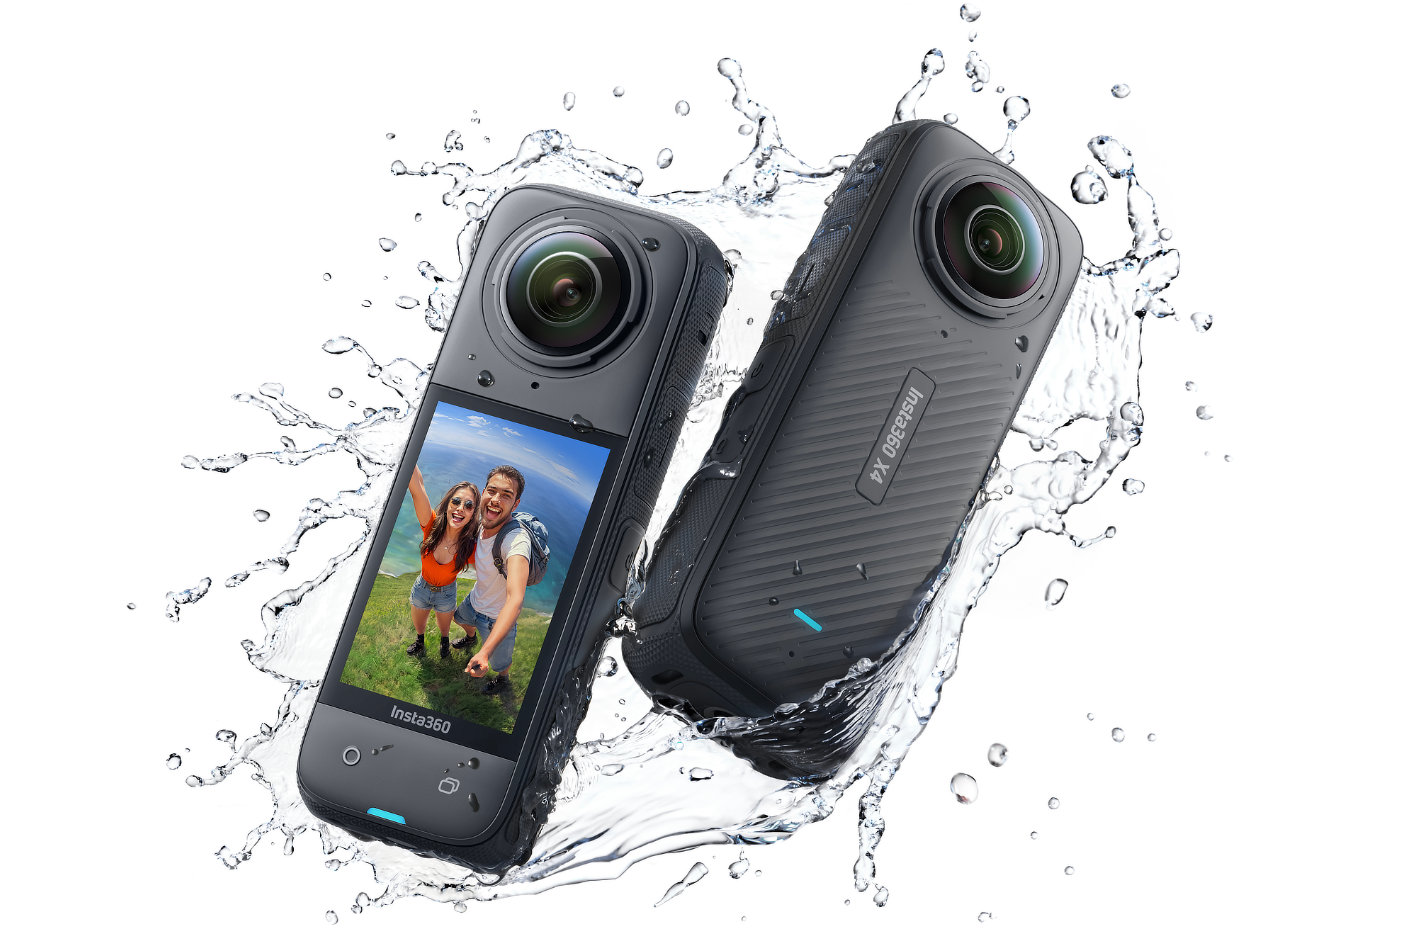 The new action cam flagship: Insta360 X4 with 8K 360° video 4